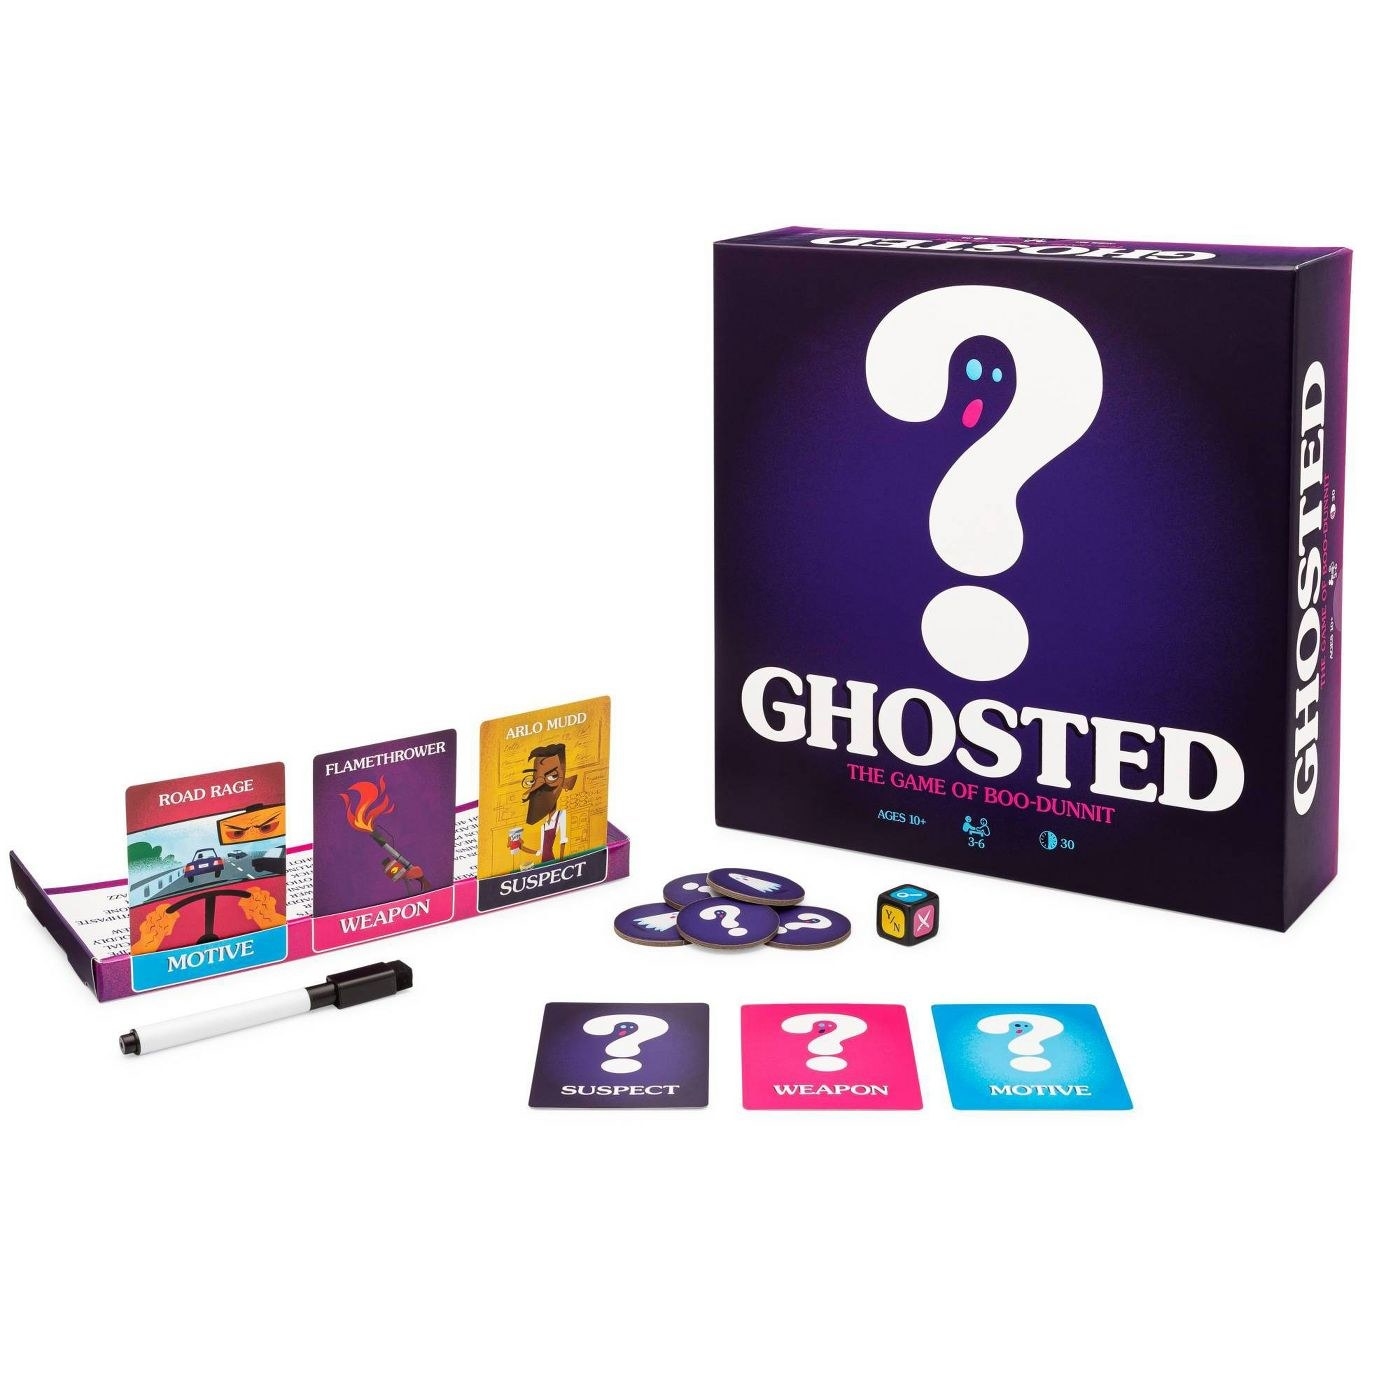 the ghosted board game and game pieces